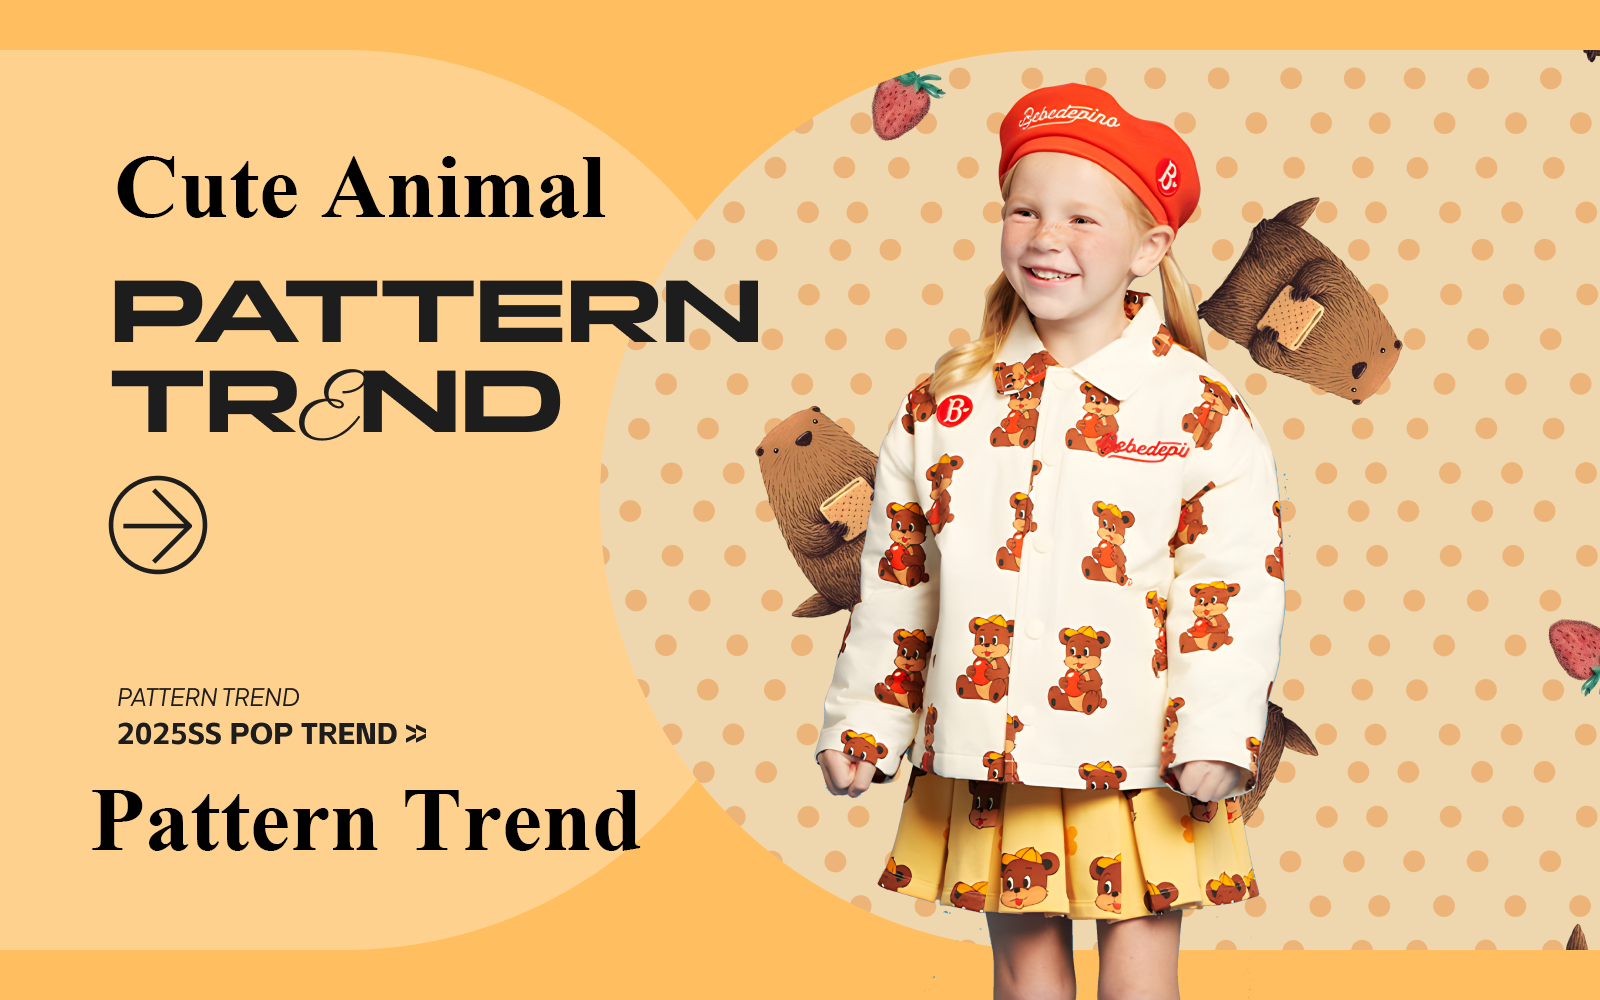 Cute Animals -- The Pattern Trend for Kidswear